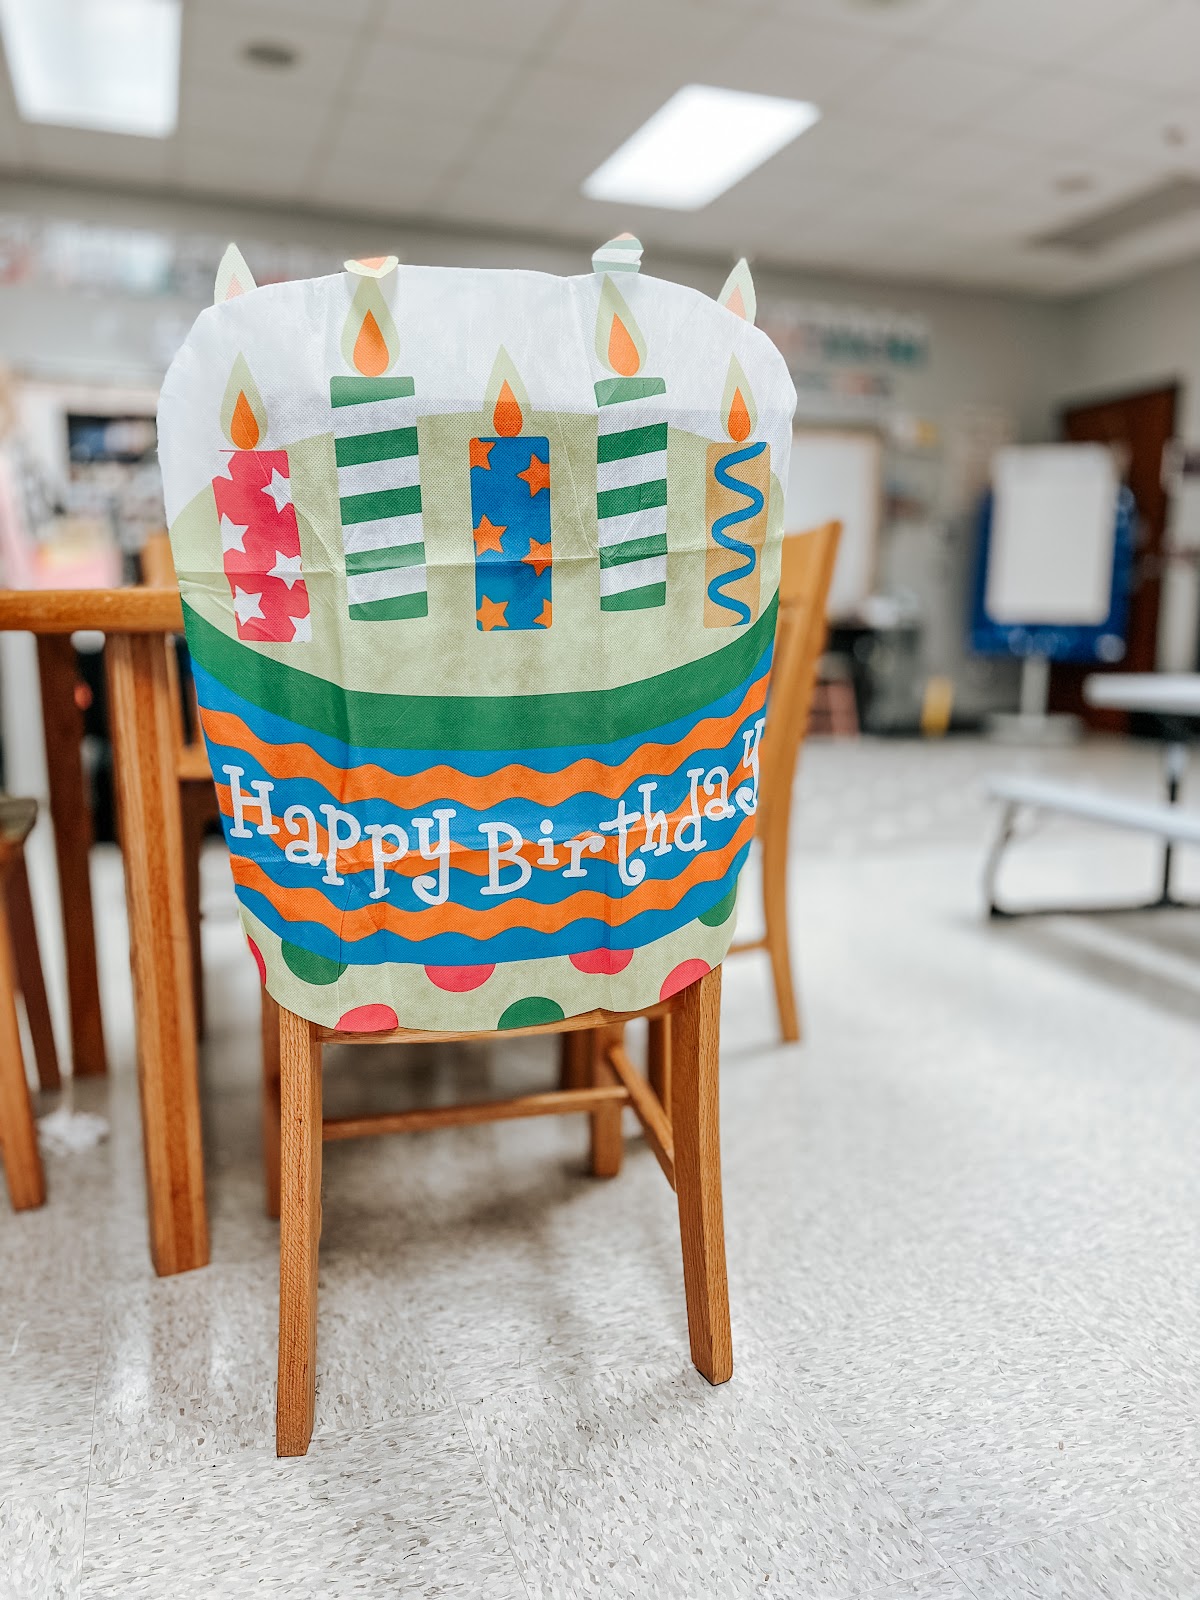 Celebrating classroom birthdays with your students can be fun and inexpensive.  Here's a blog post on how to celebrate student birthdays.